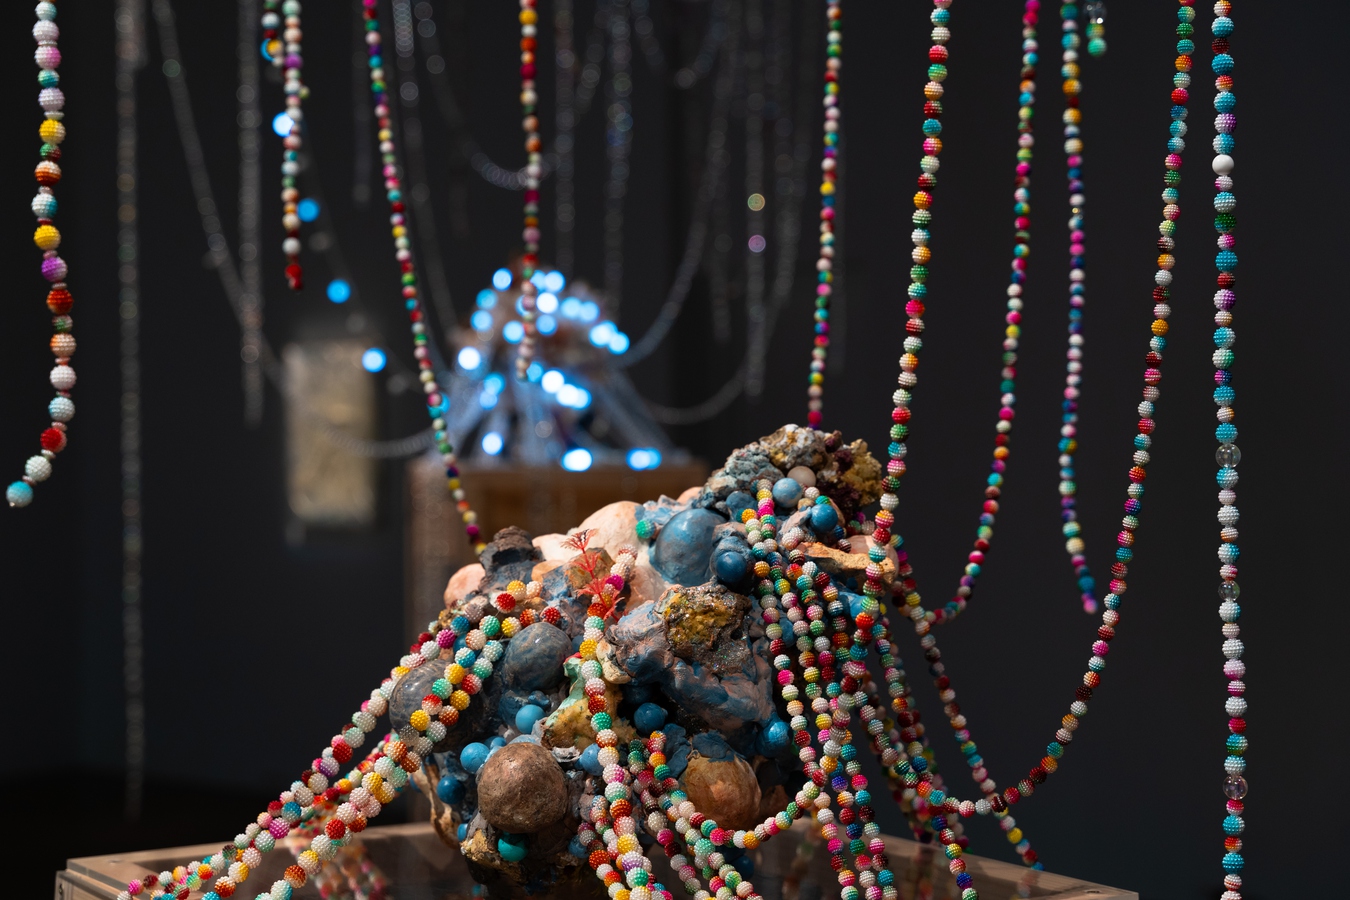 Image: Suji Park, Beatdol II (detail), 2022. Fired clay, ceramic, plastic, foam, epoxy clay, plaster, paper clay, glaze, resin, acrylic paint. Photo by Lindsey de Roos.